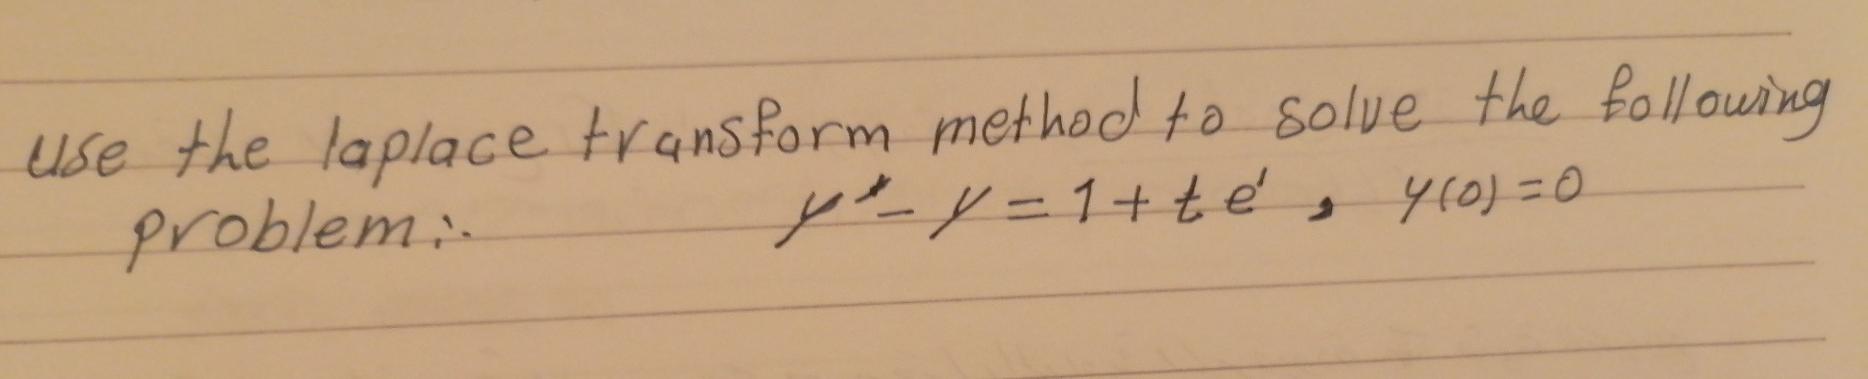 Use The Laplace Transform Method To Solve The Following Problemi Yty 1 Te 460 0 1